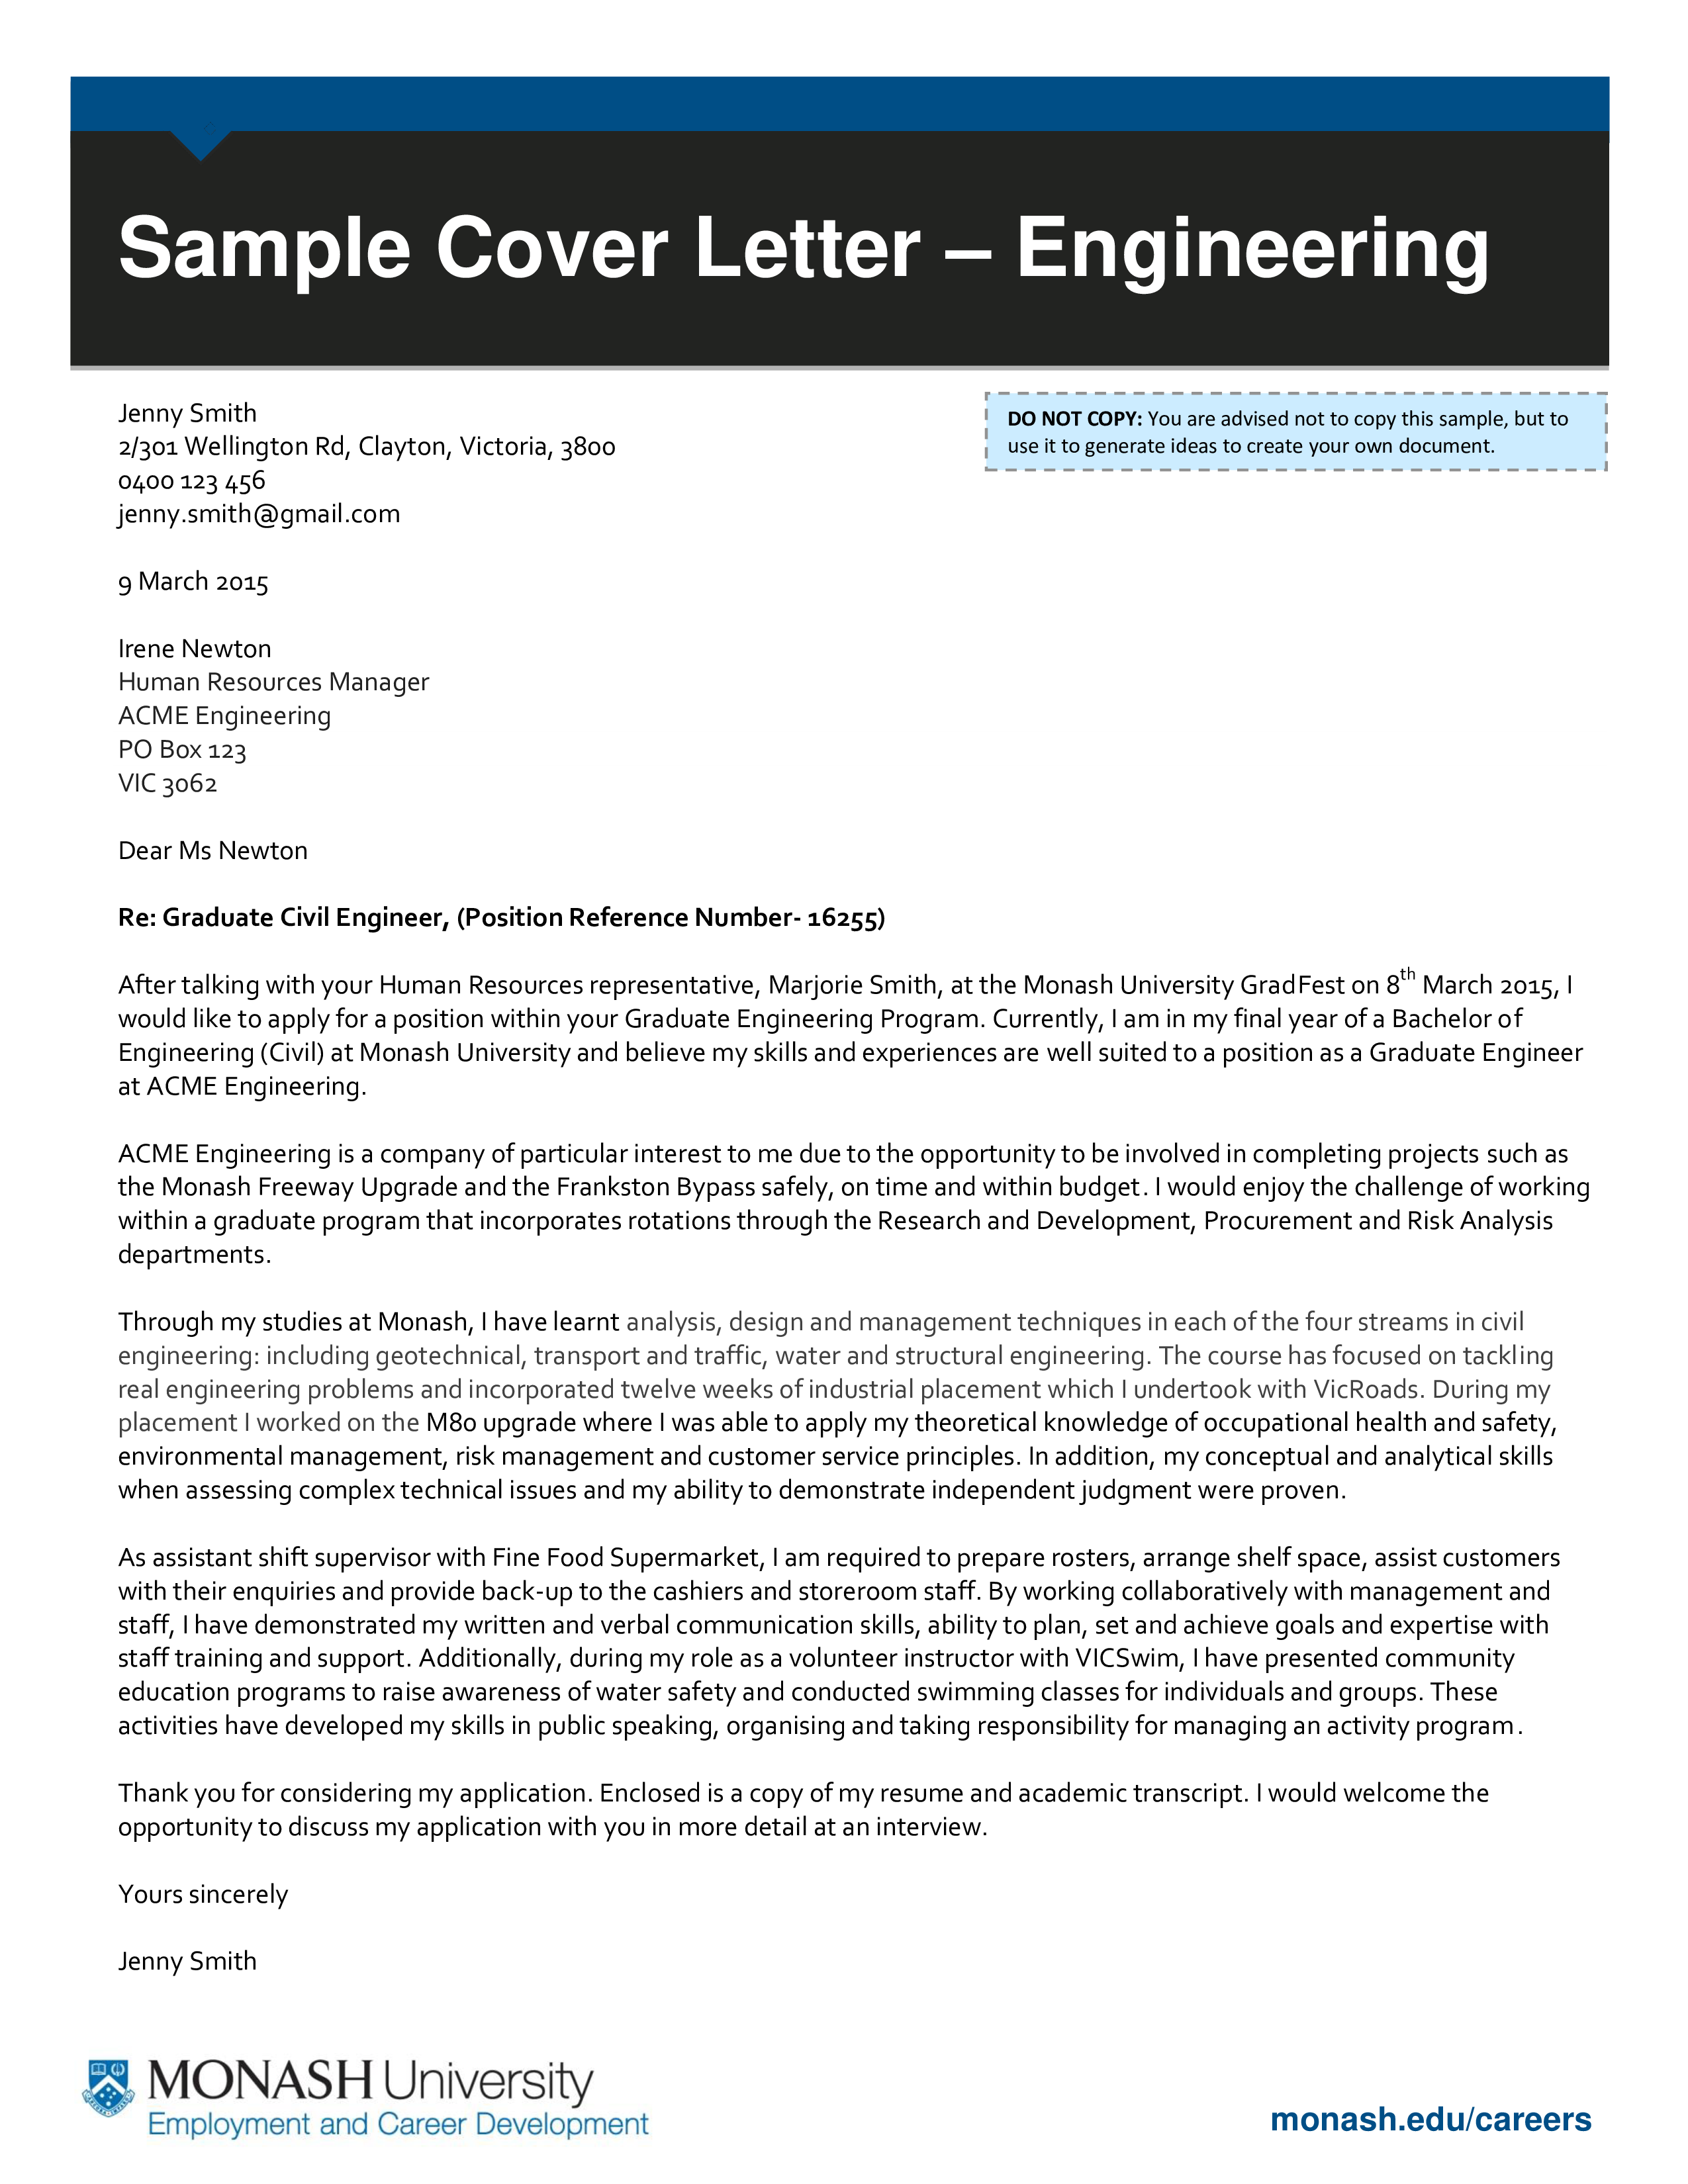 view-engineering-resume-cover-letter-examples-the-latest-gover